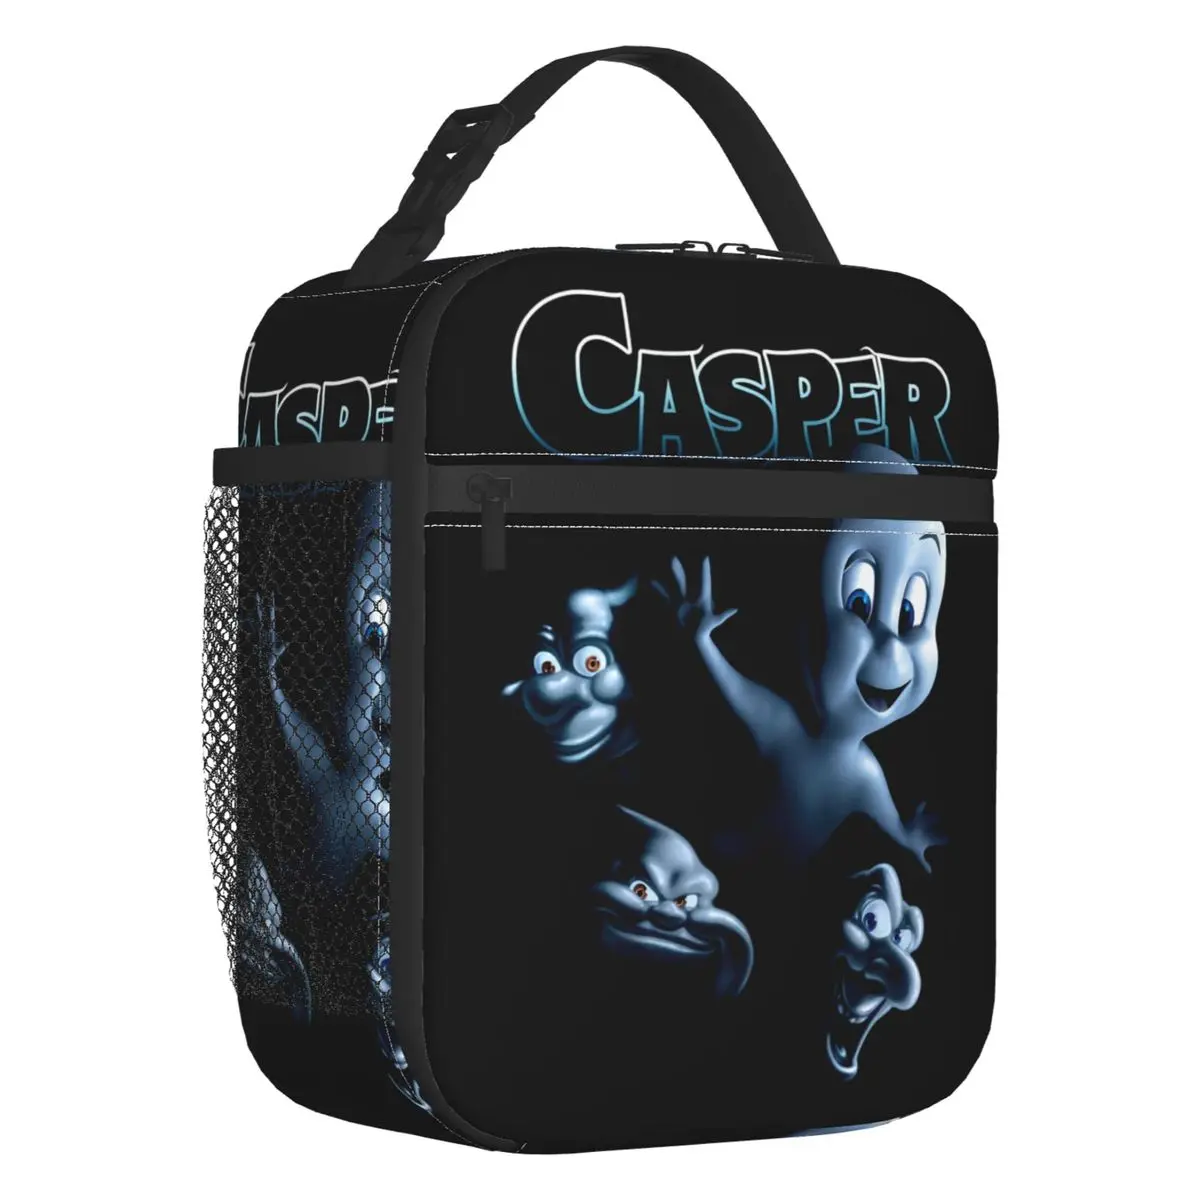 Horror Film Casper Cartoon Resuable Lunch Boxes for Women Waterproof Thermal Cooler Food Insulated Lunch Bag Office Work